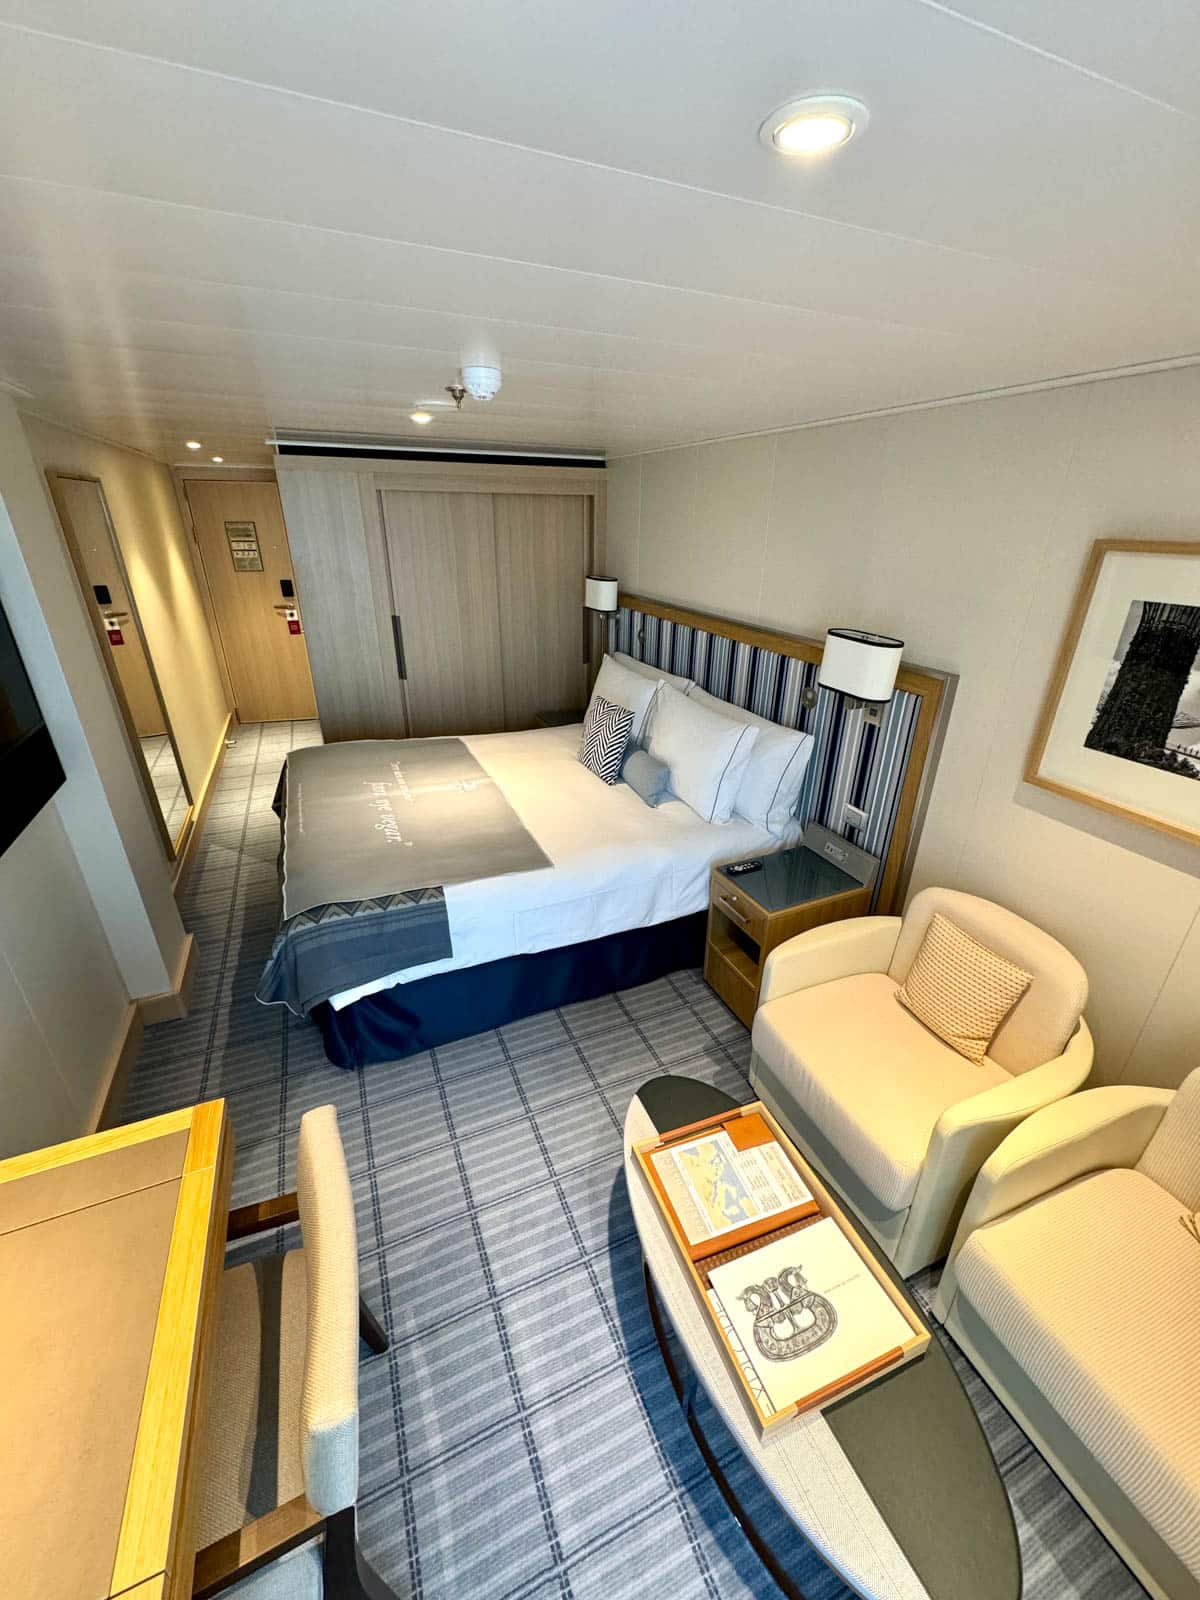 Room on a cruise ship.